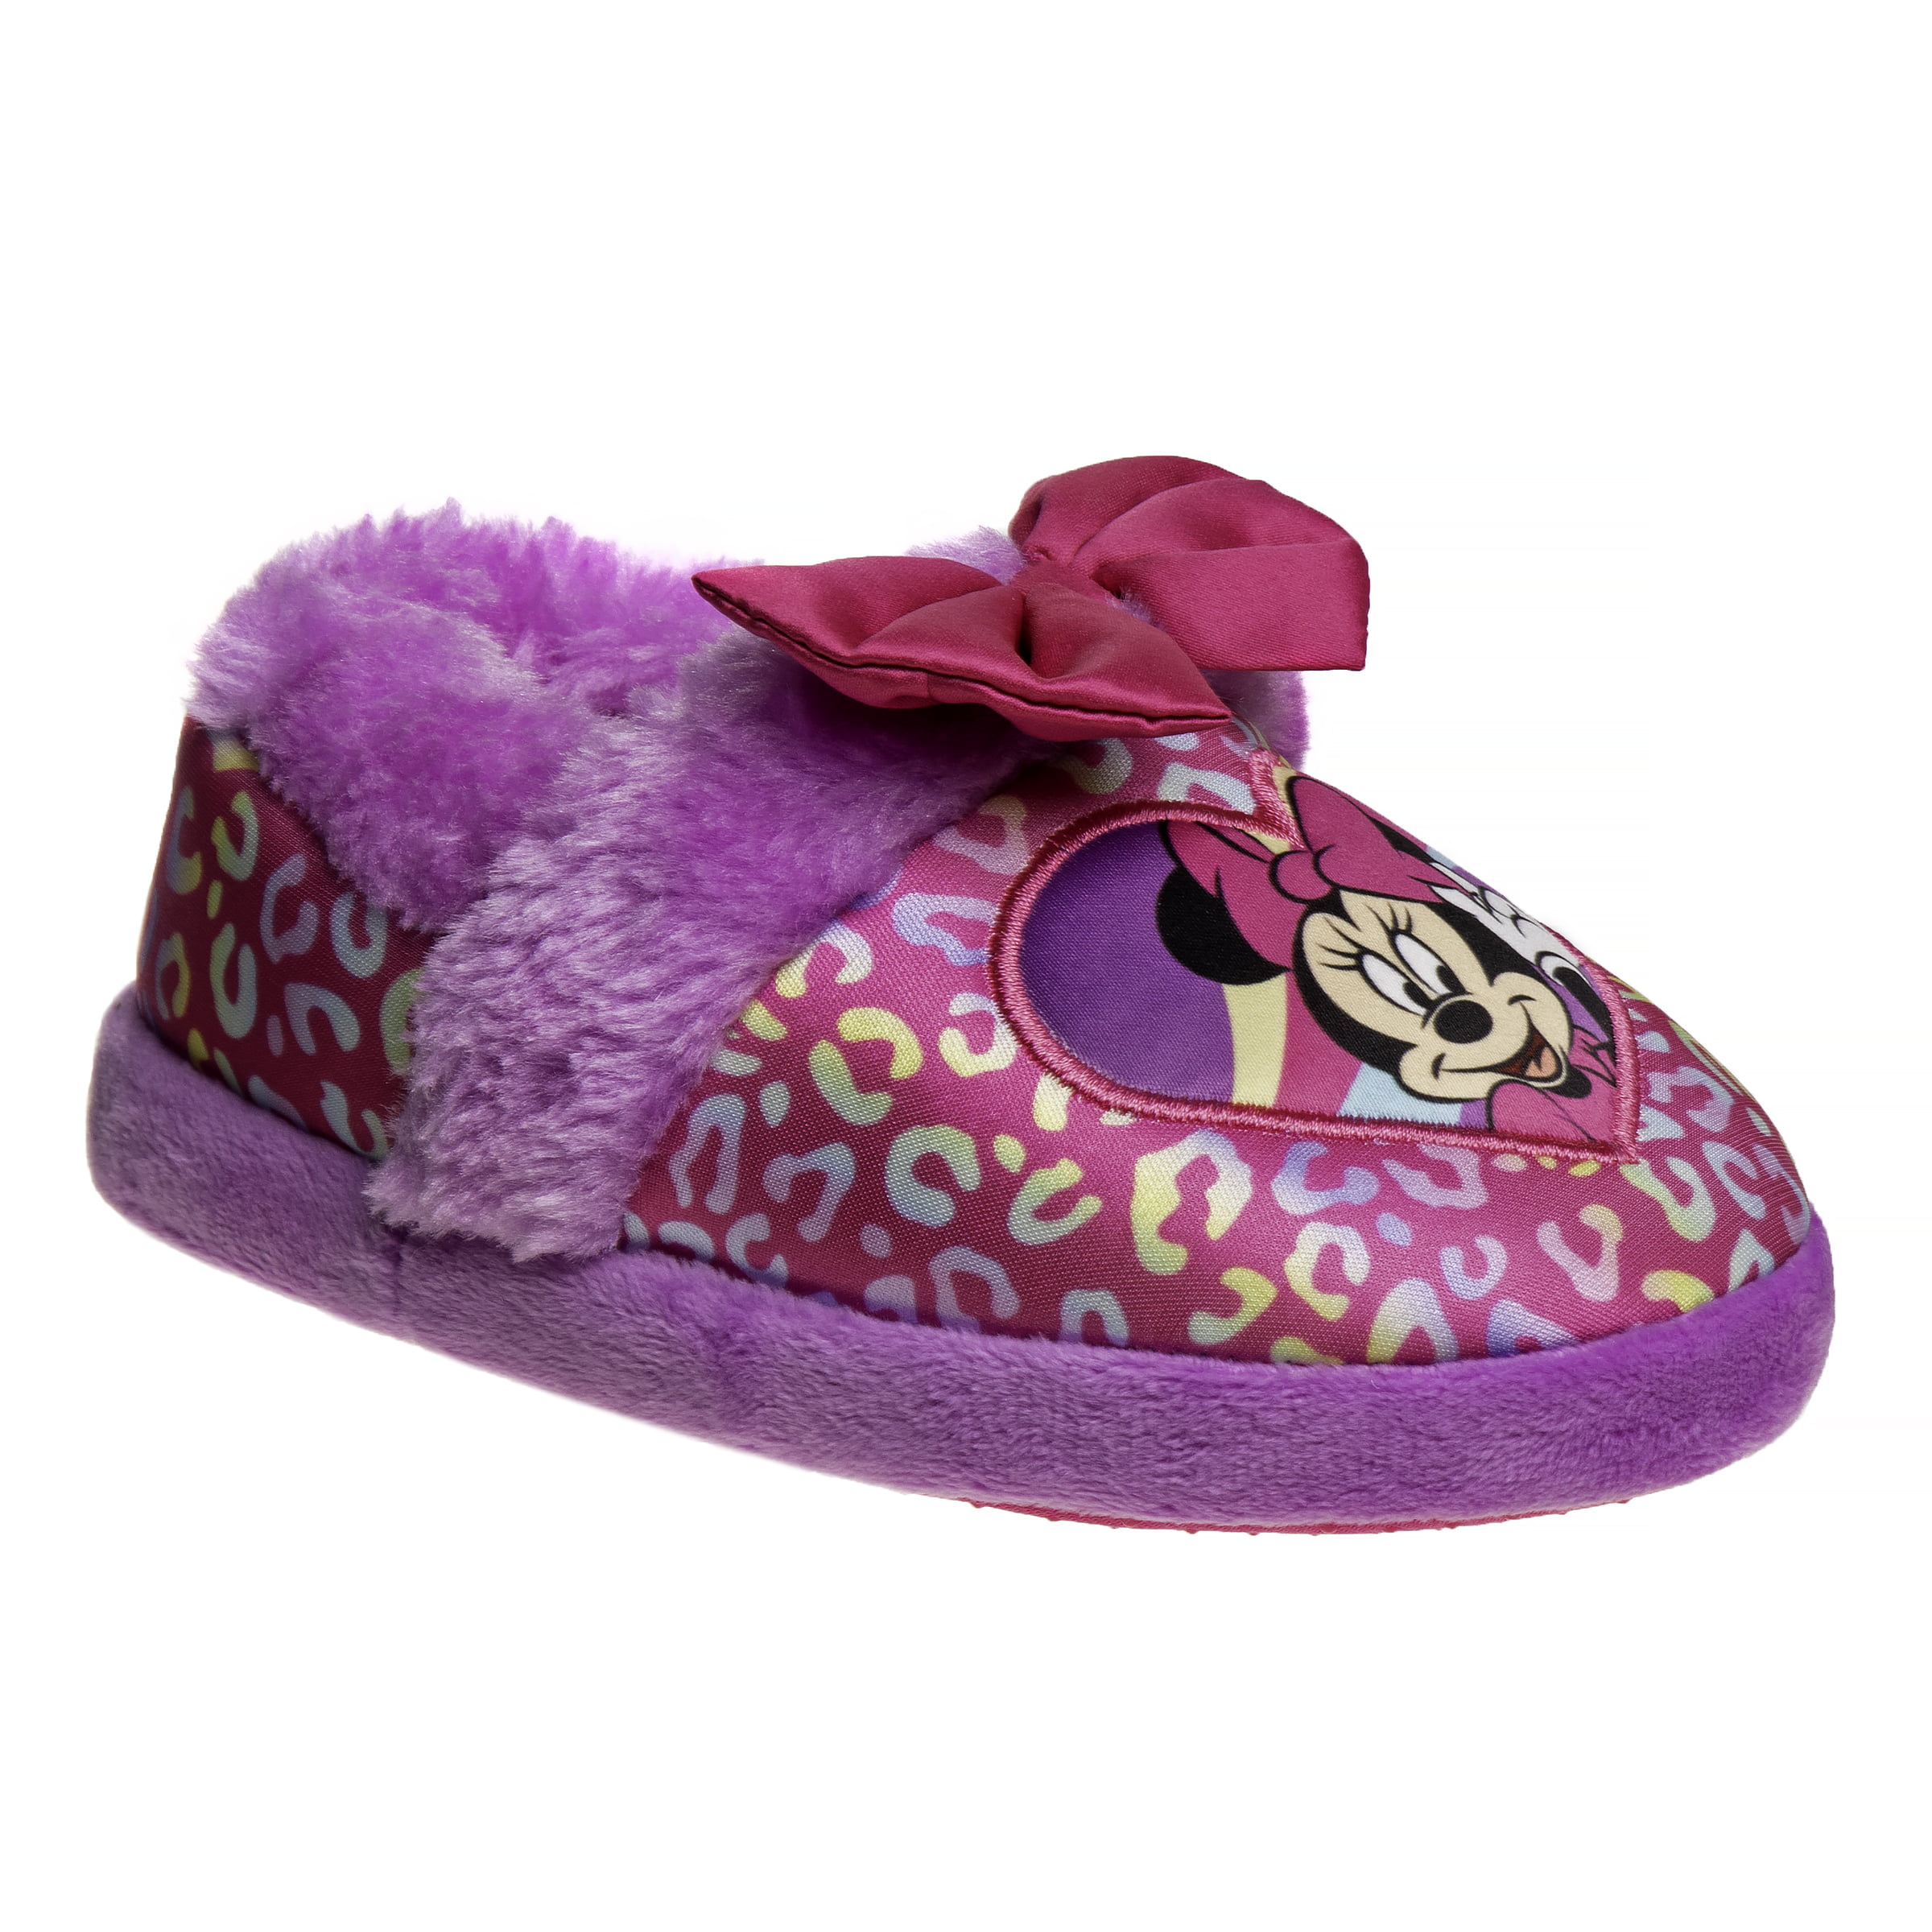 Disney Minnie Mouse slippers -